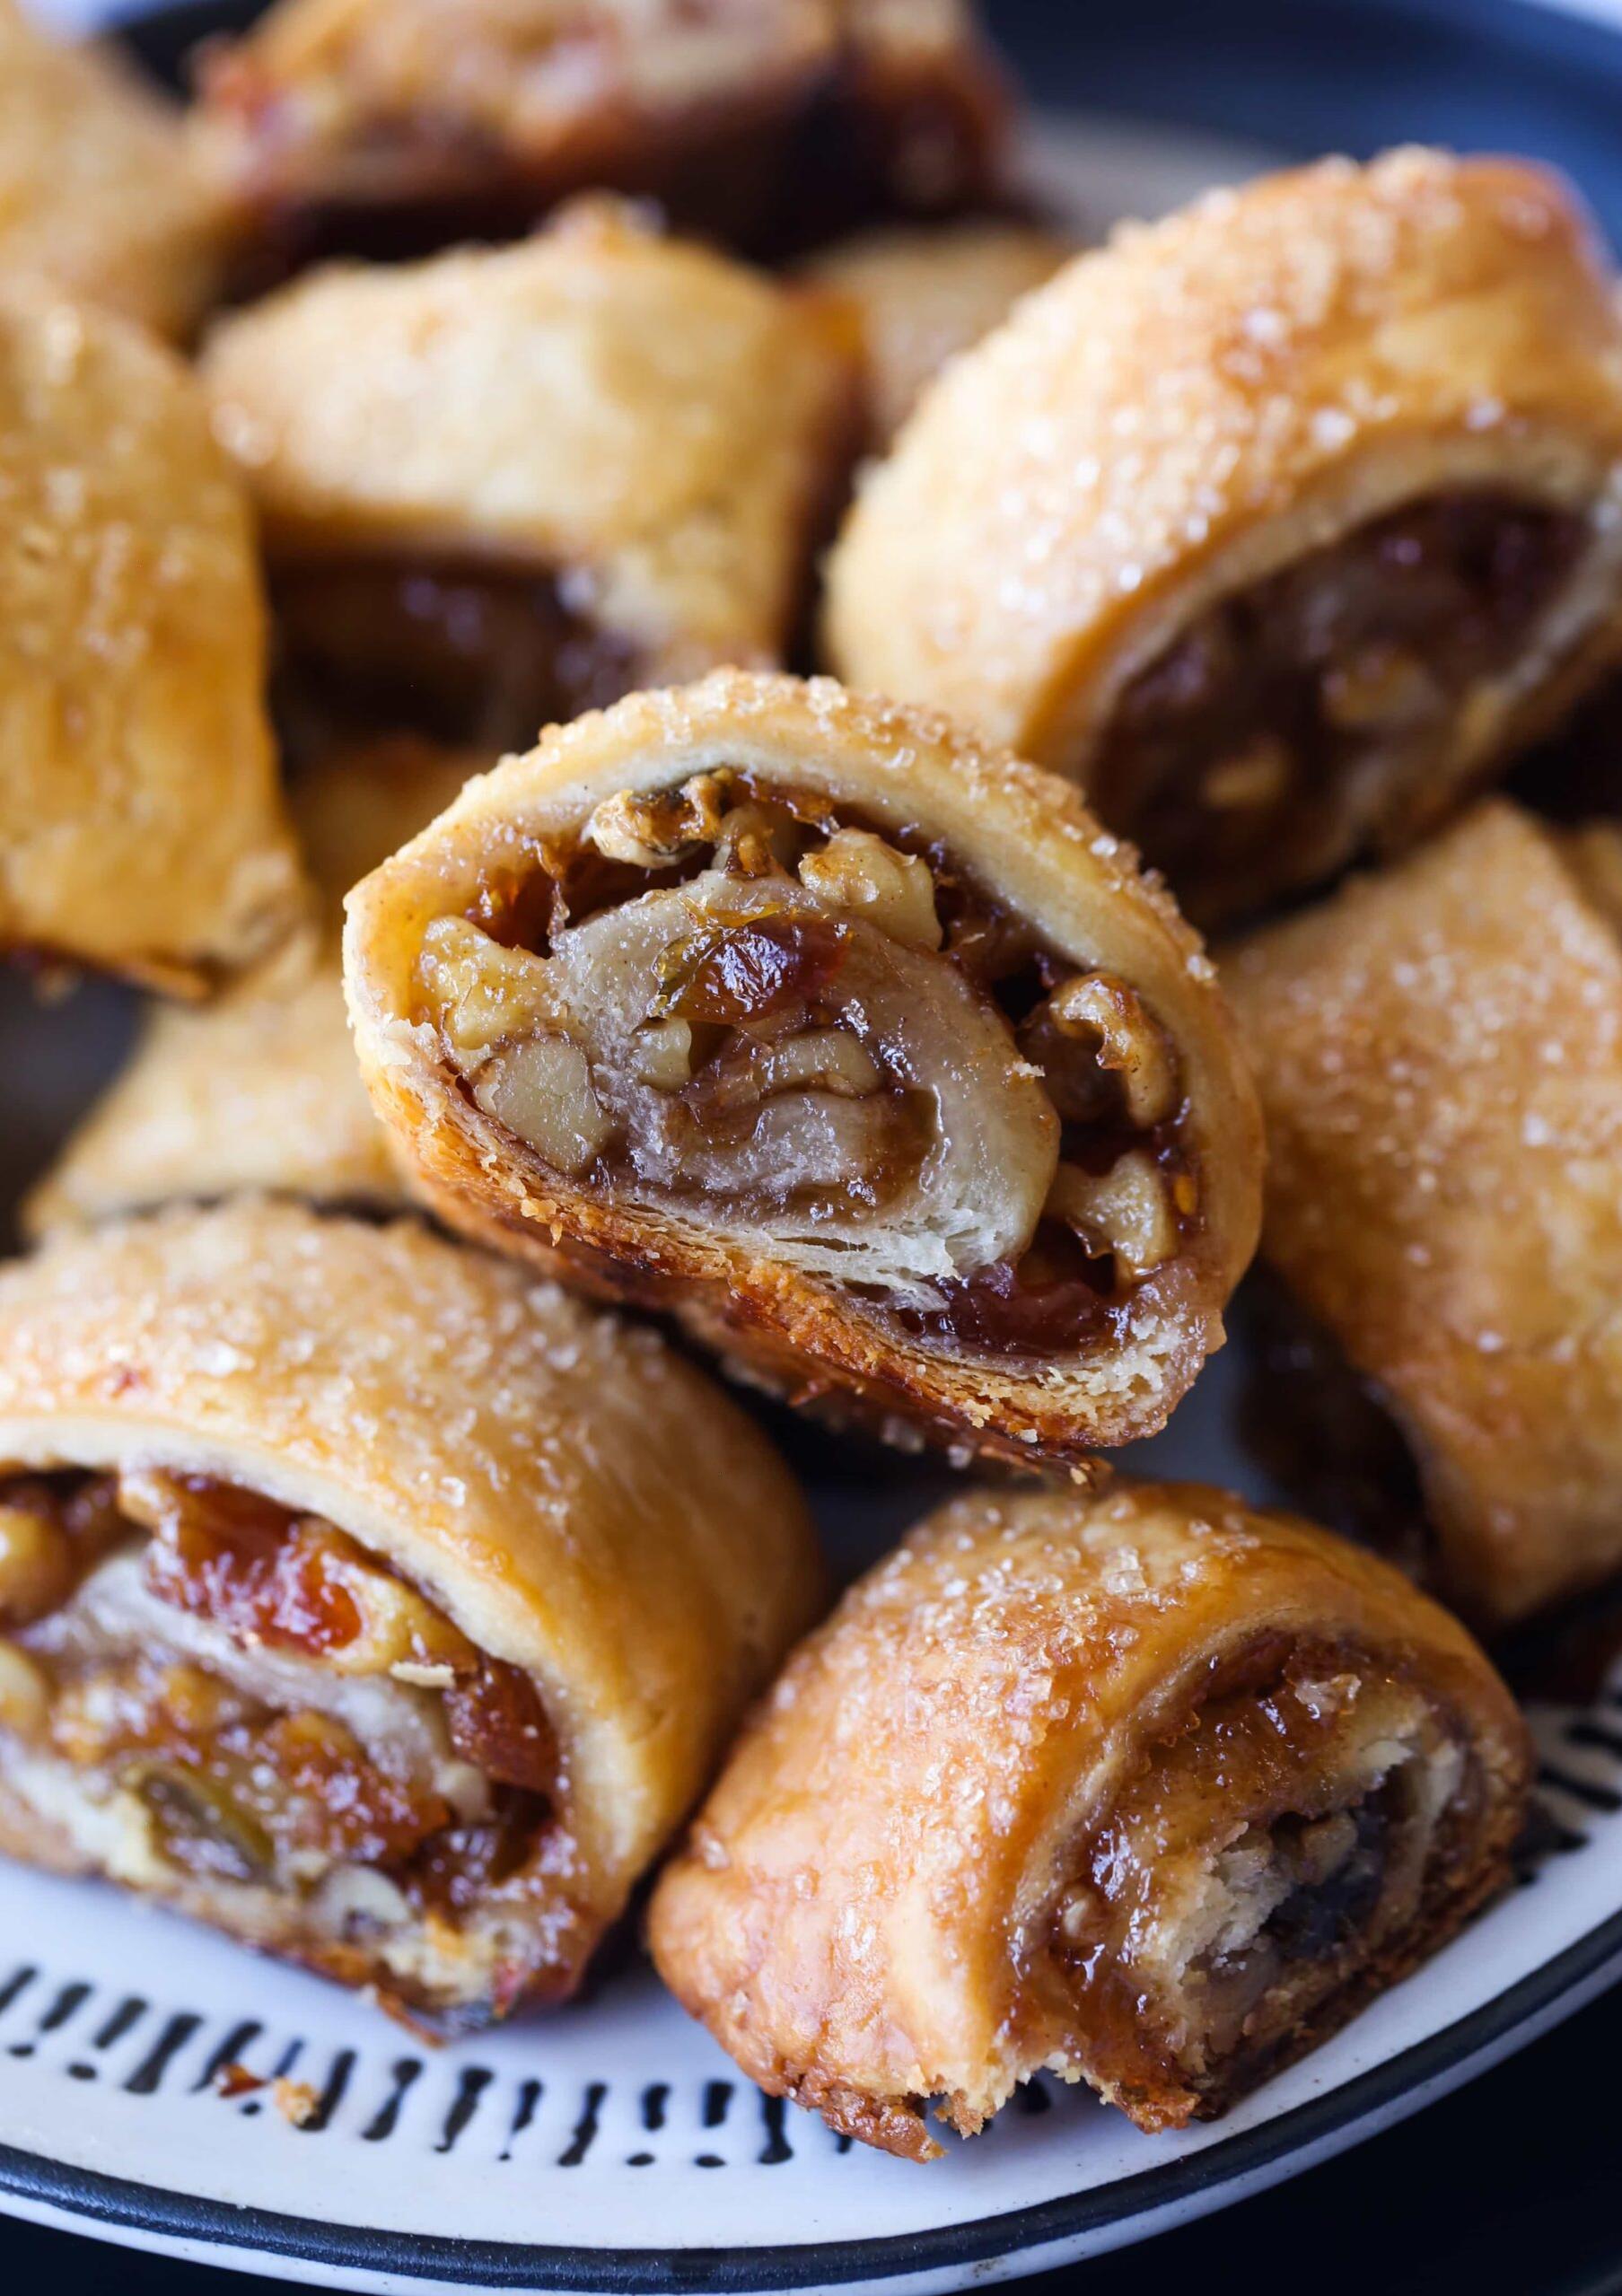  My irresistible real rugelach is perfect for breakfast or a sweet snack.